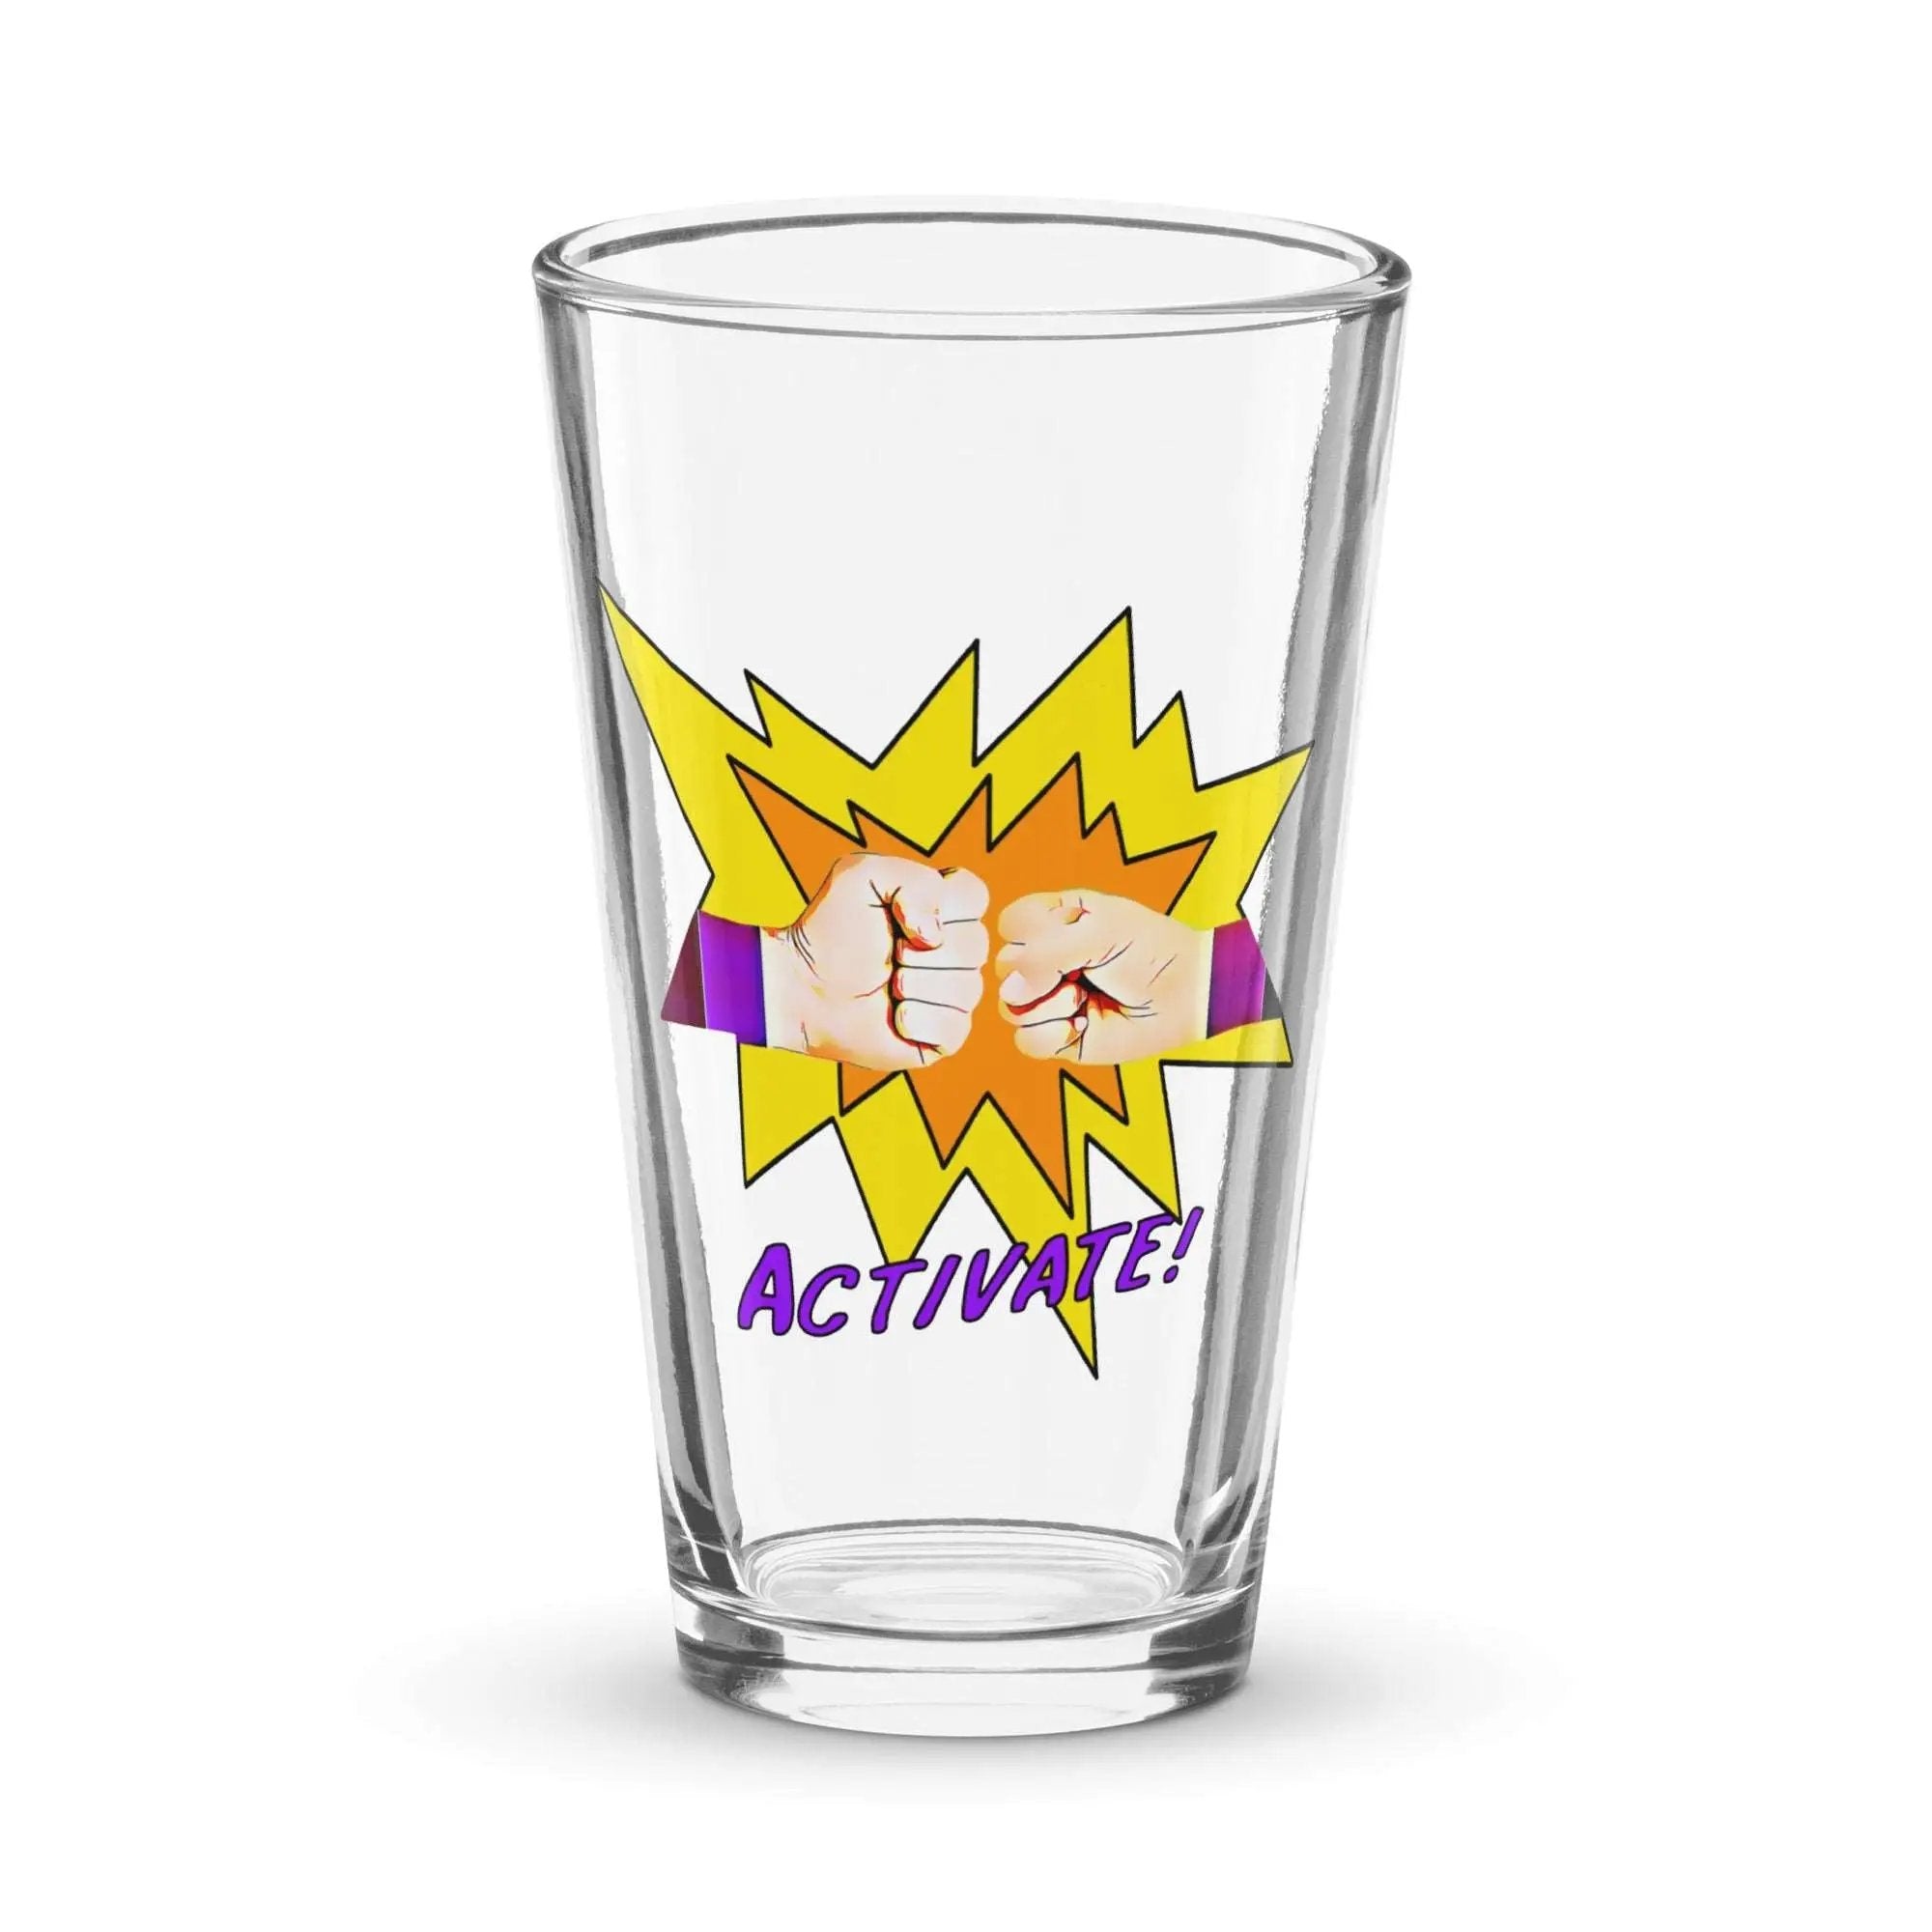 Activate! Shaker pint glass